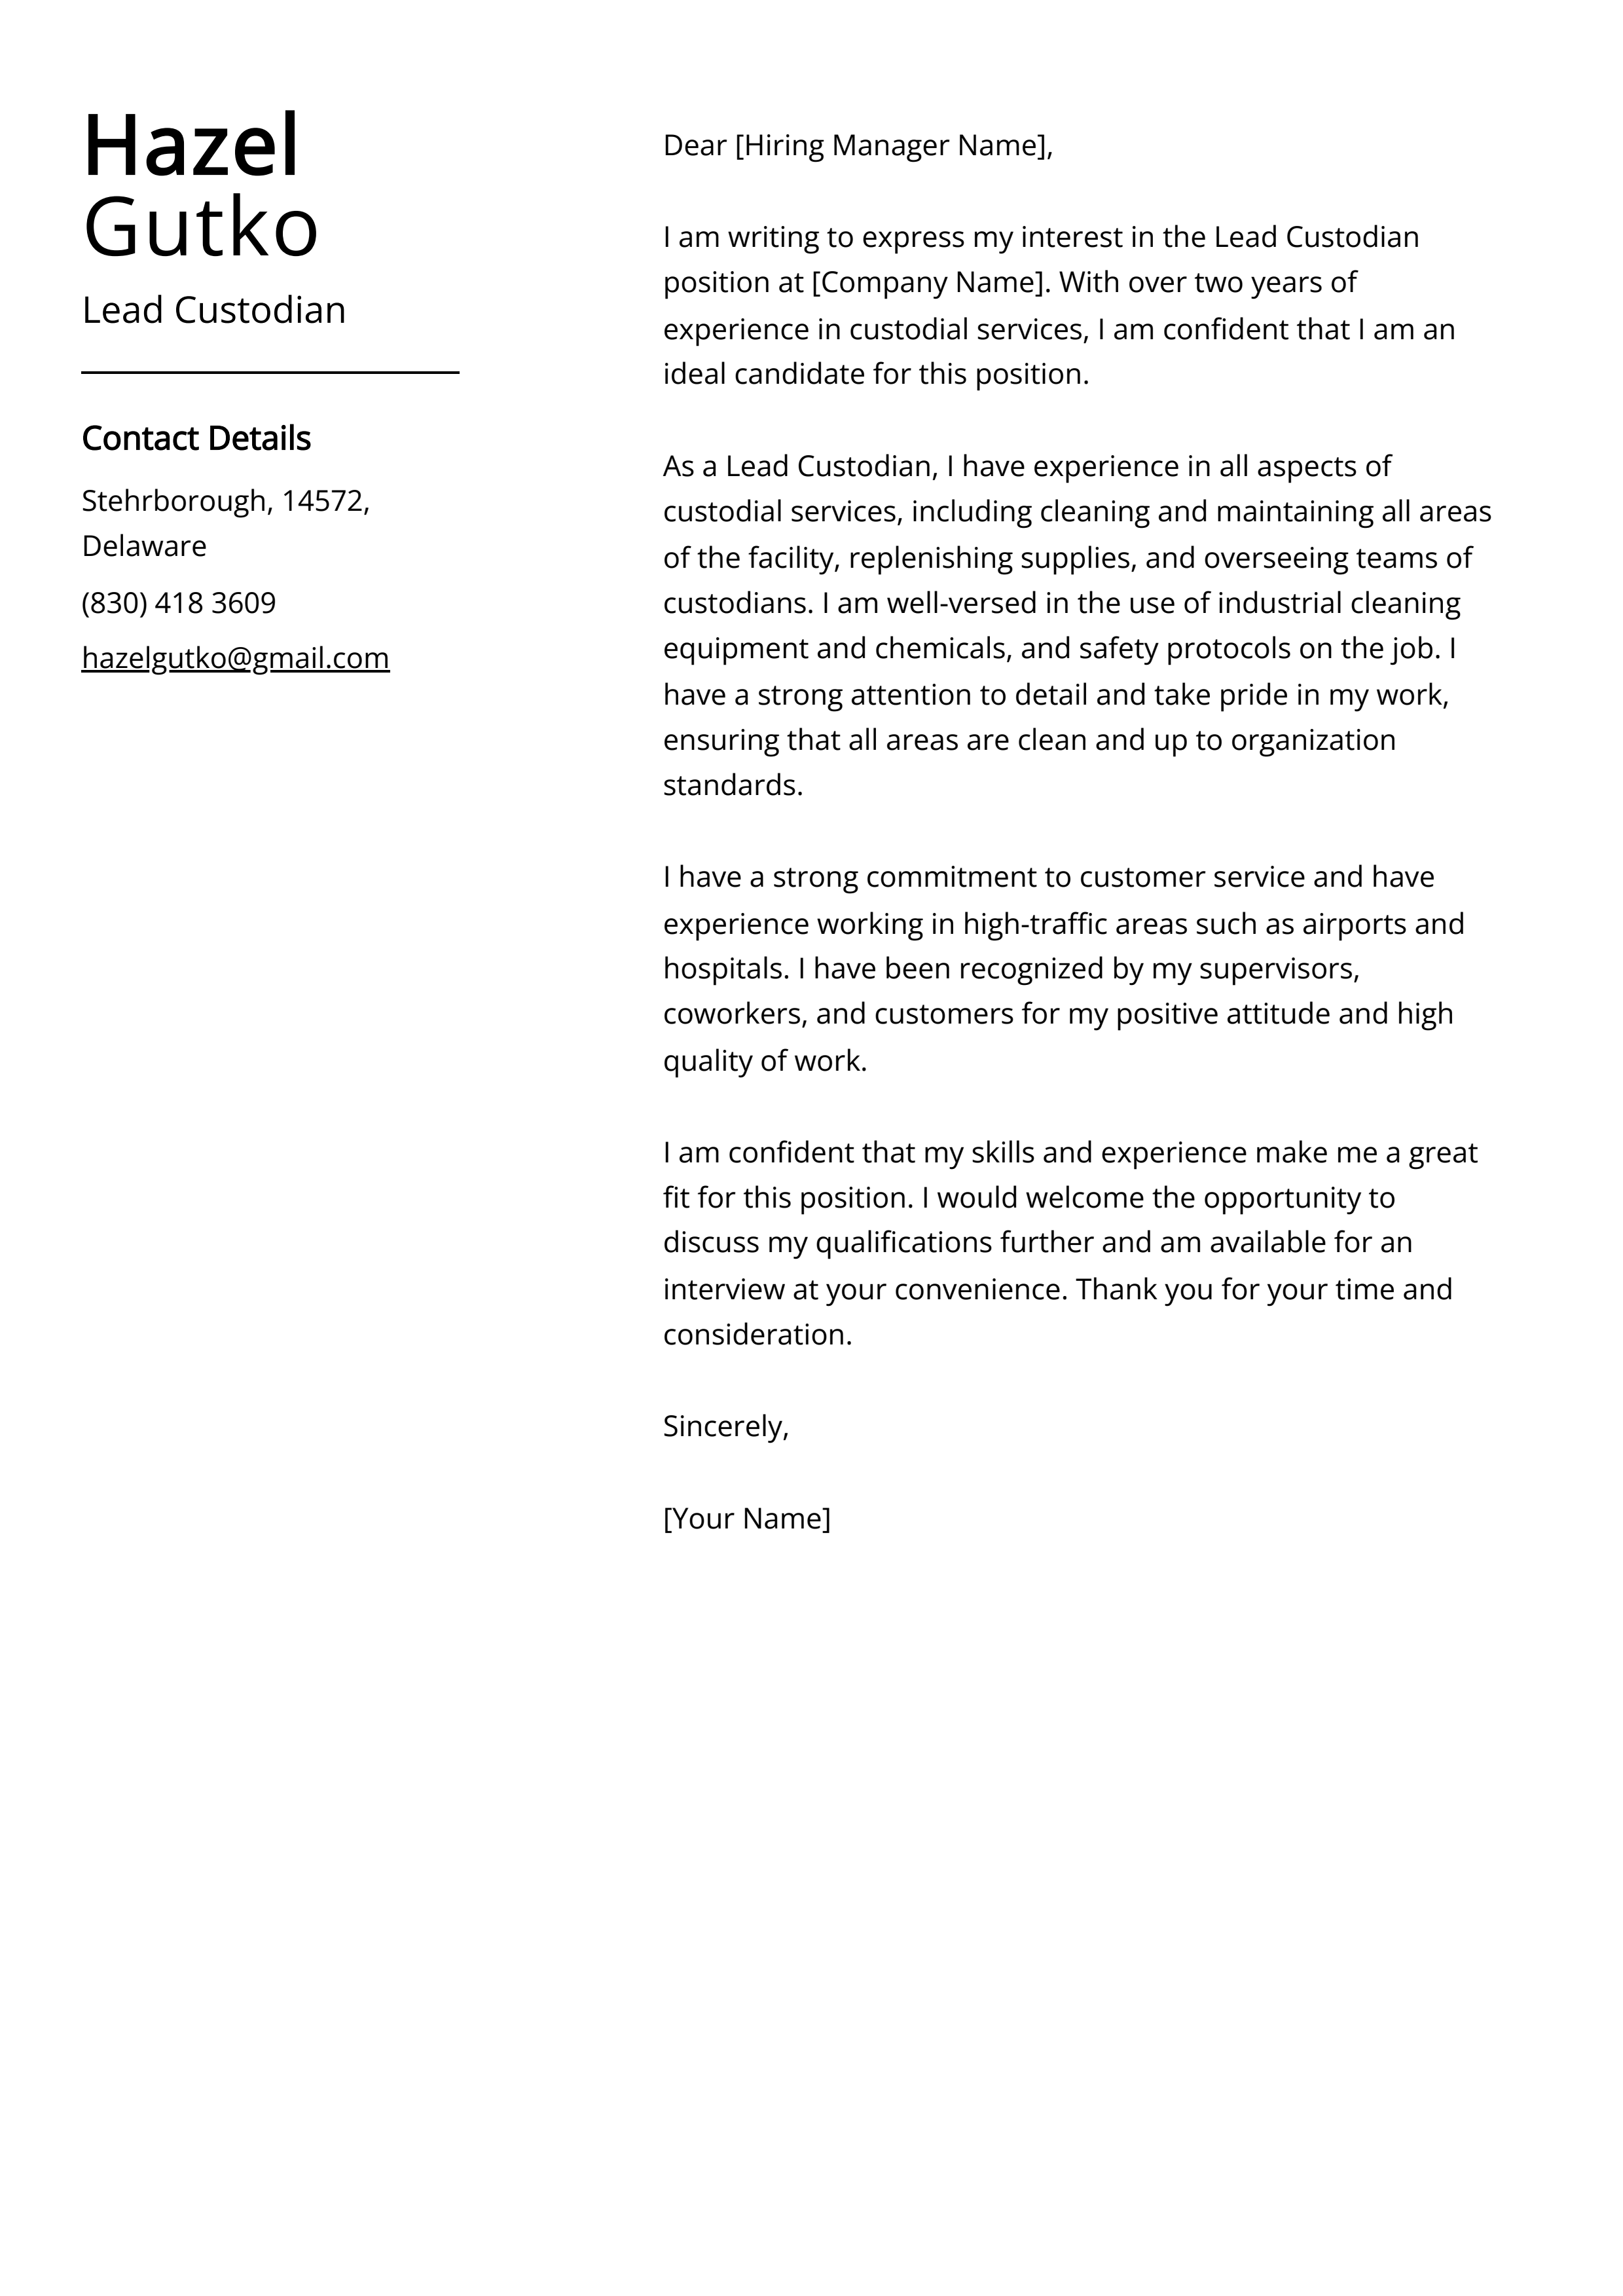 Lead Custodian Cover Letter Example